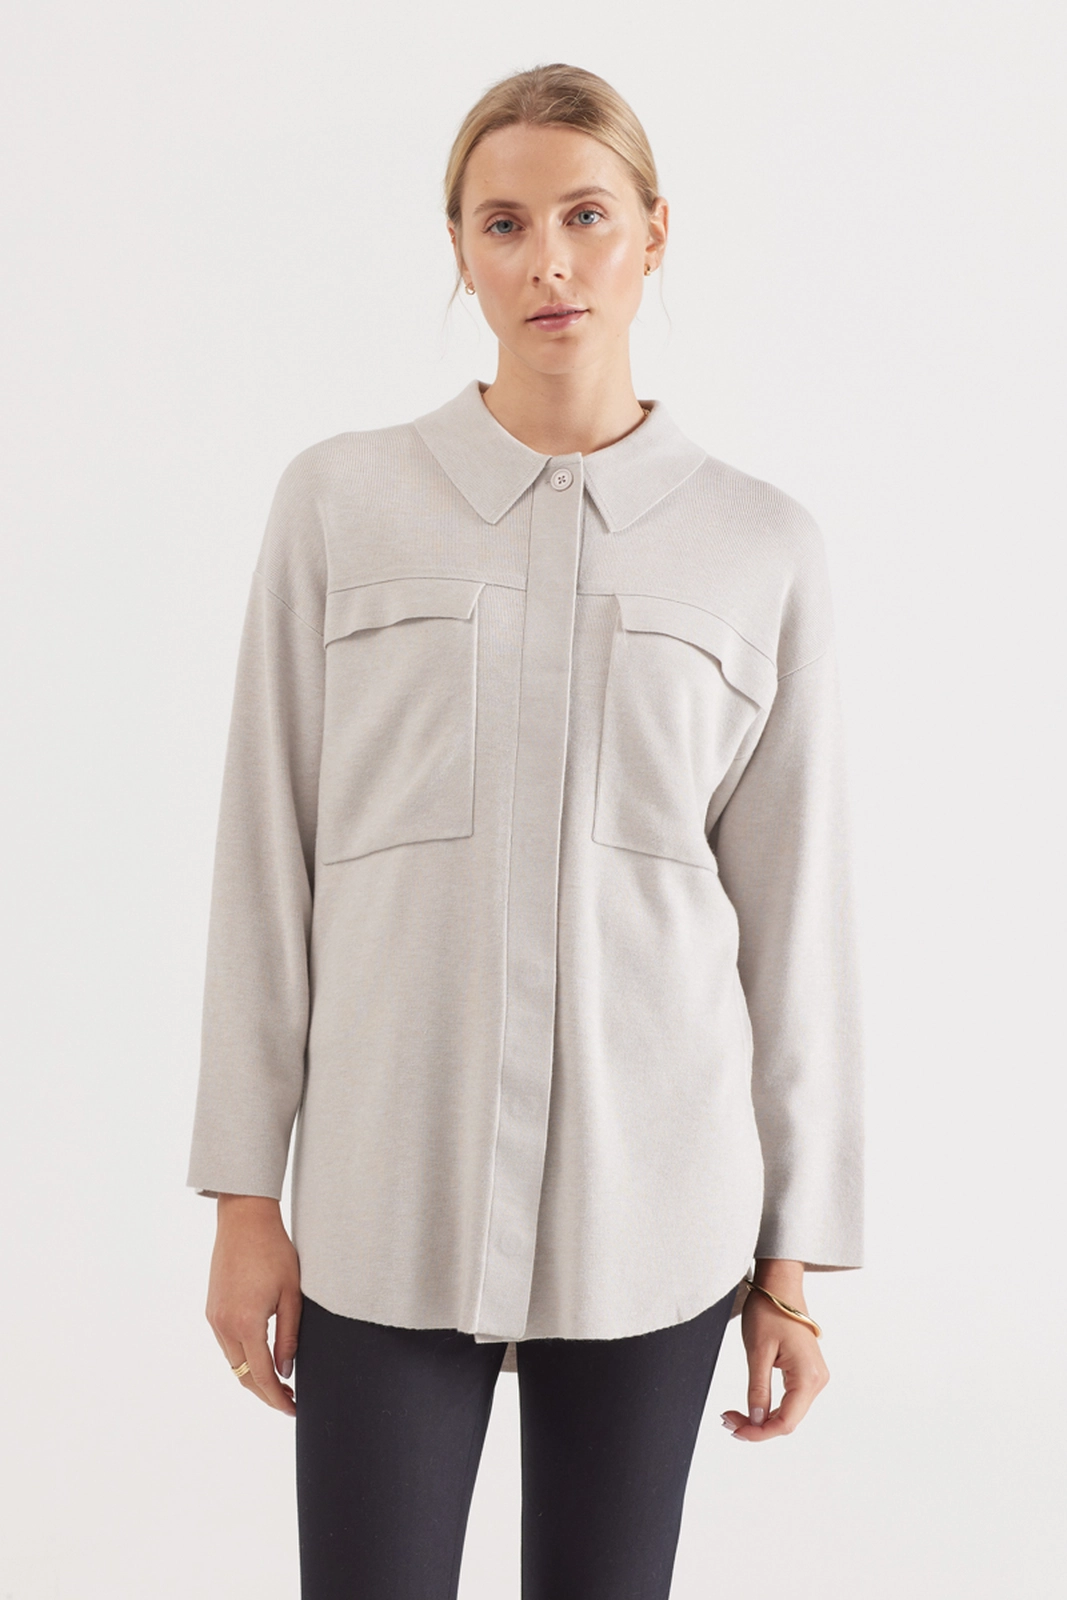 Elka Collective Harriet Knit Shirt - Thyme Clothing